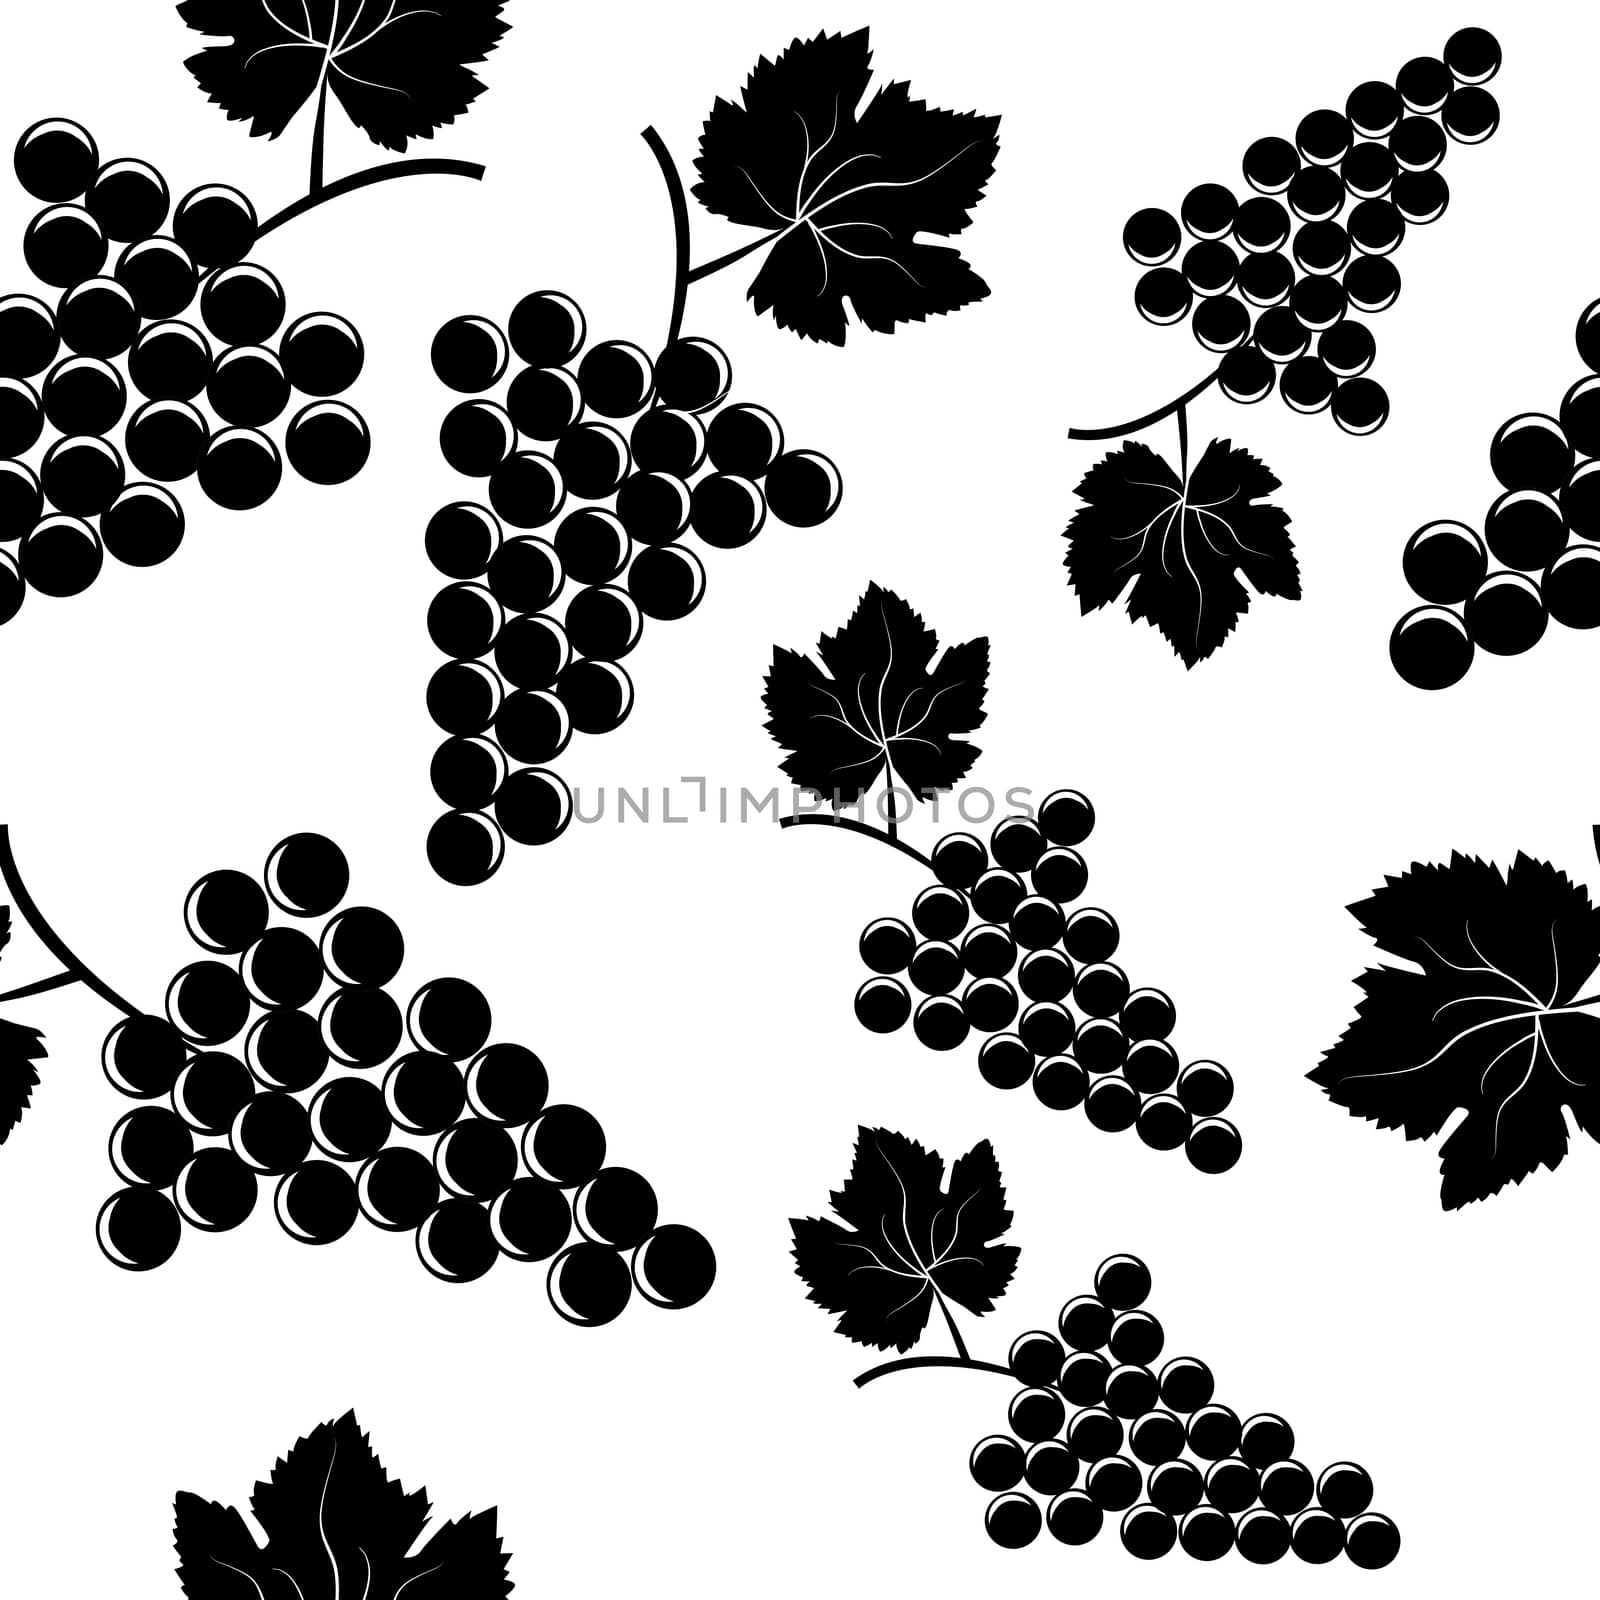 Background with grapes by hibrida13